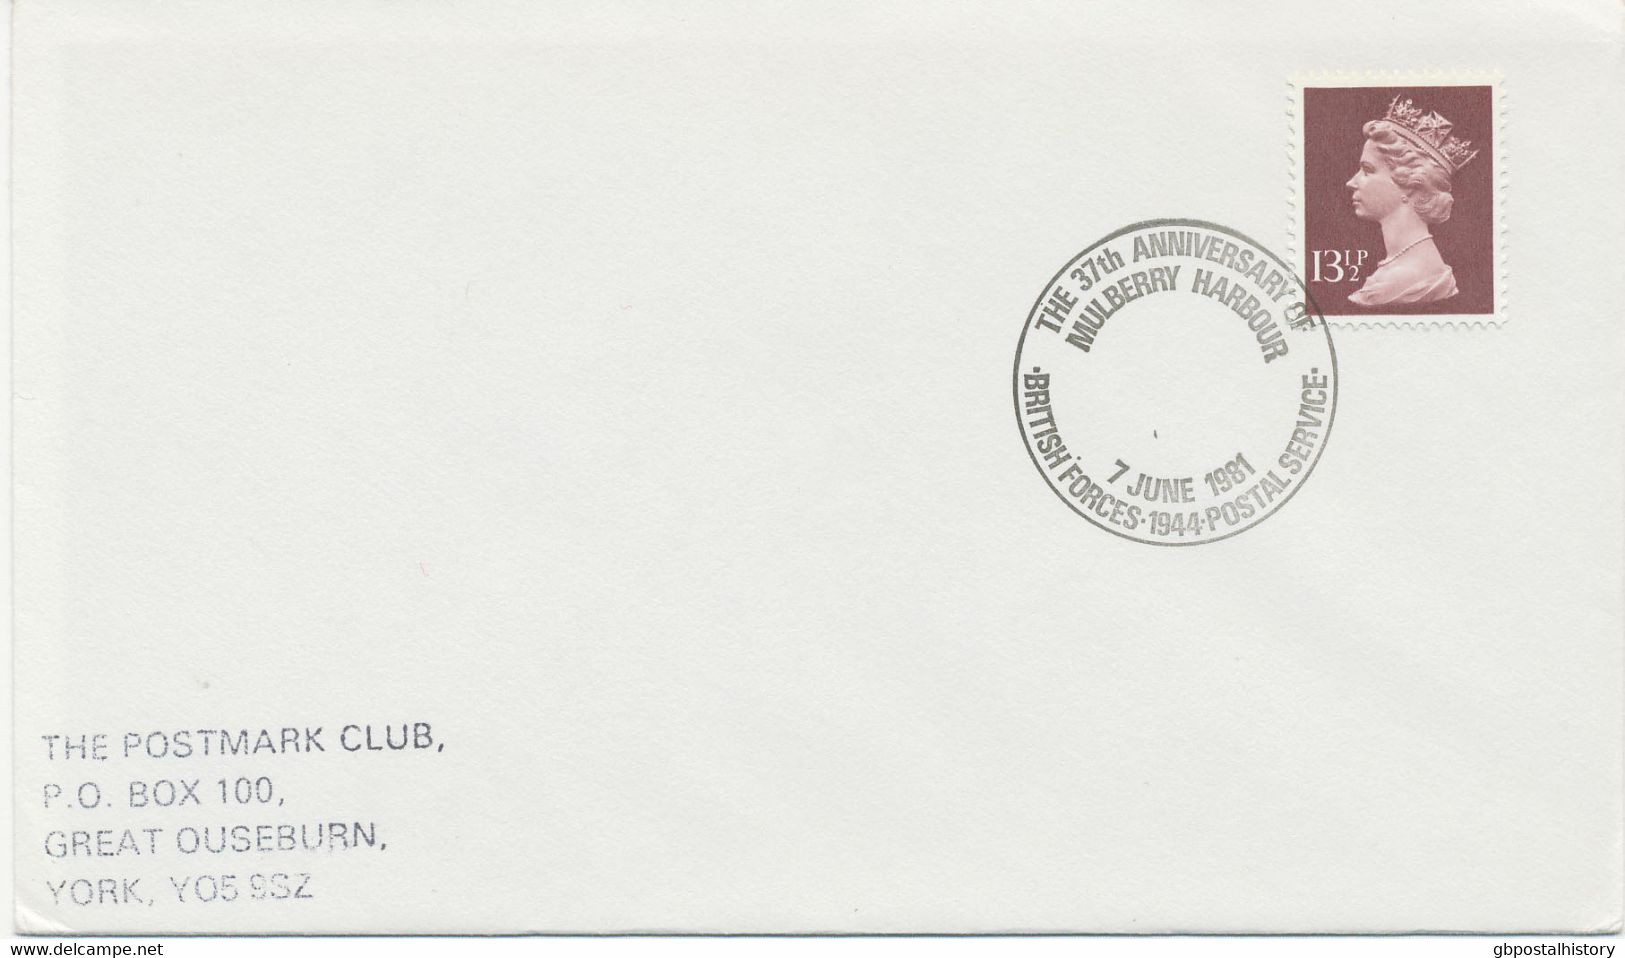 GB SPECIAL EVENT POSTMARKS THE 37th ANNIVERSARY OF MULBERRY HARBOUR - 7 JUNE 1981 - BRITISH FORCES 1944 POSTAL SERVICE - Marcofilie